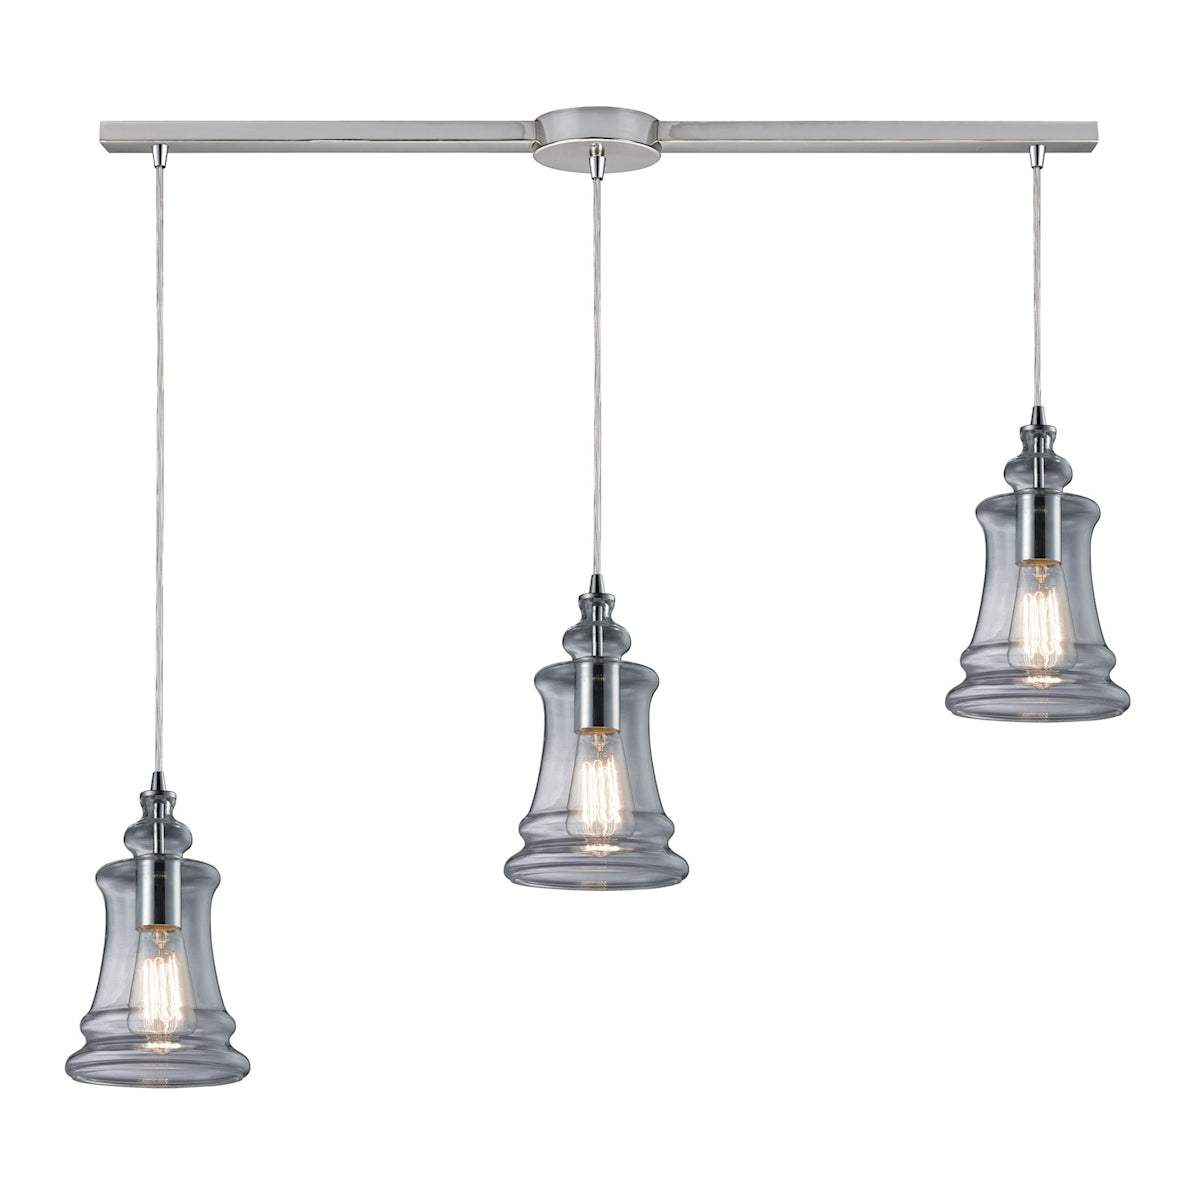 ELK Lighting 60052-3L Menlow Park 3-Light Linear Pendant Fixture in Polished Chrome with Smoked Glass